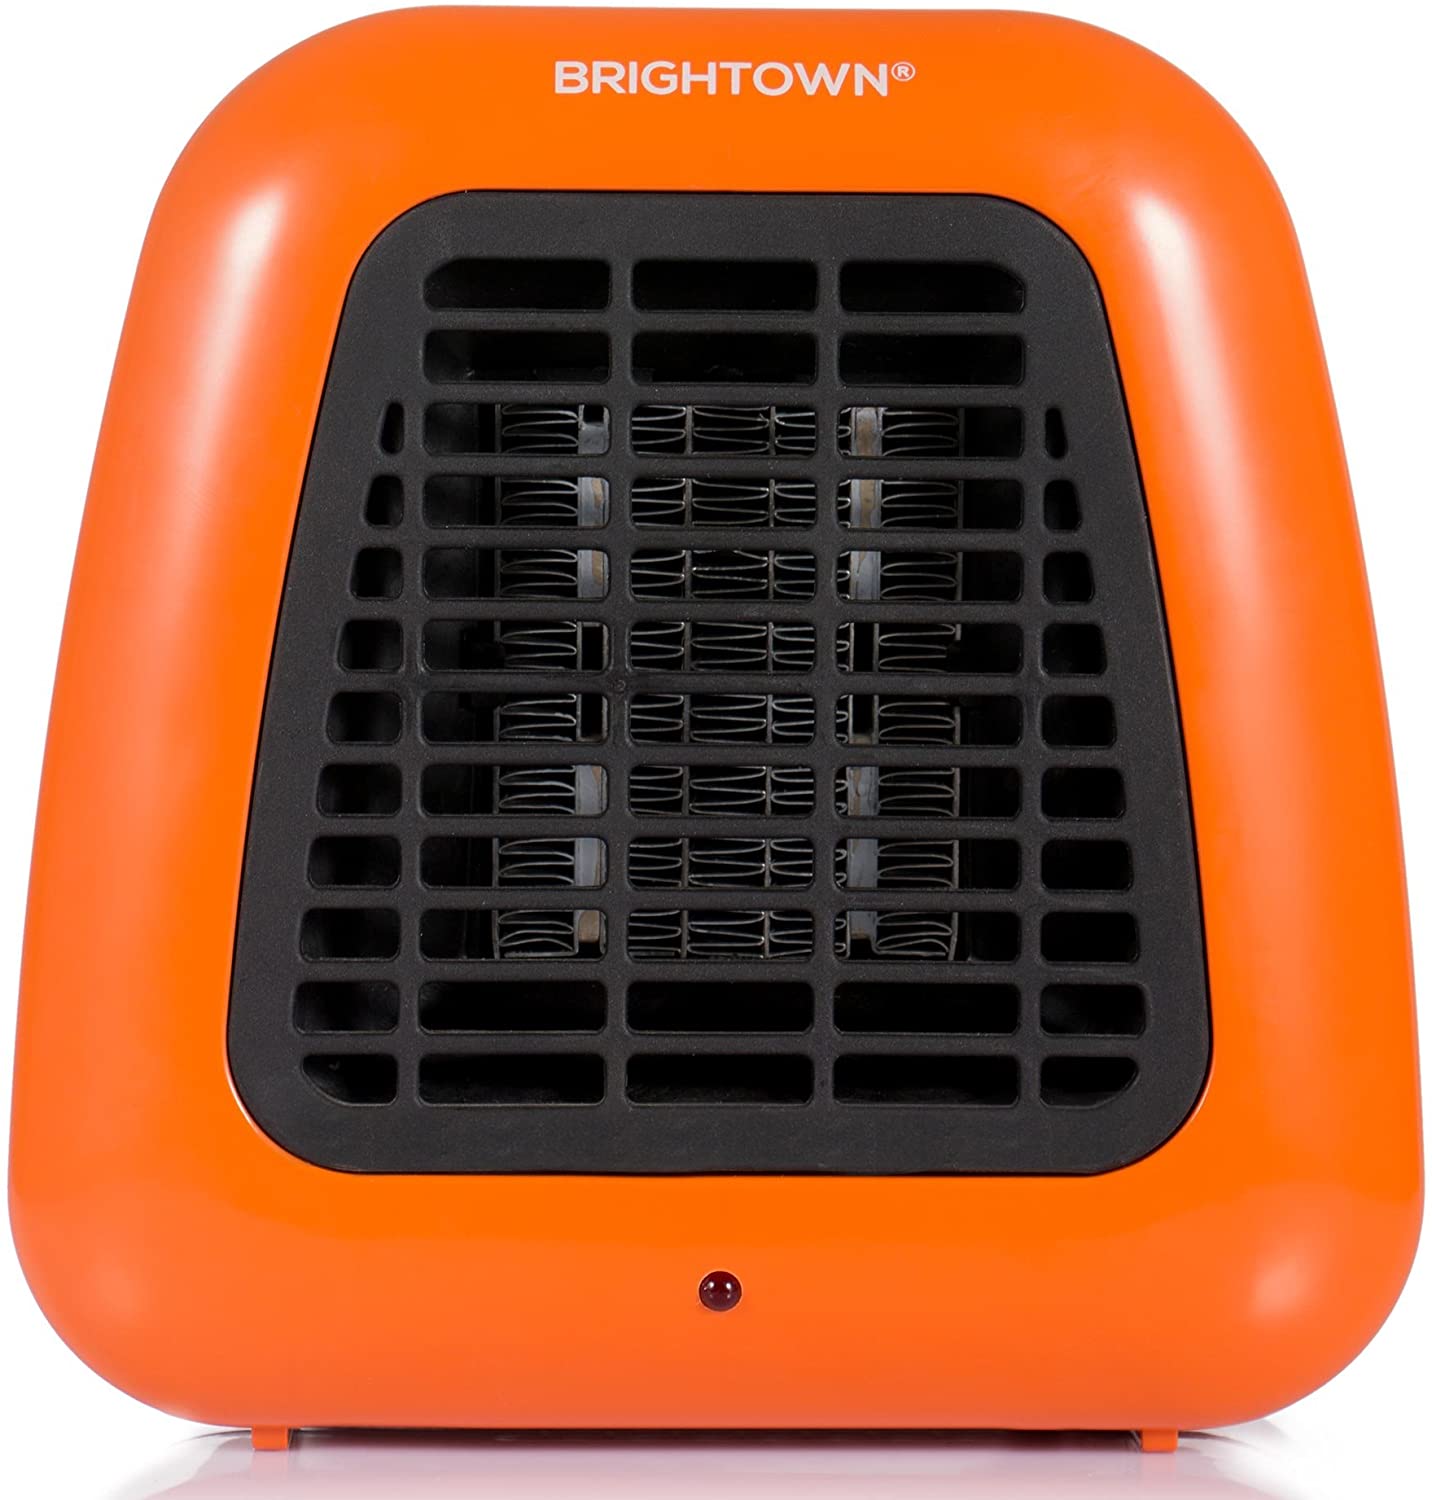 The Best Desk Heater January 2022, Space Heater For Desk At Work